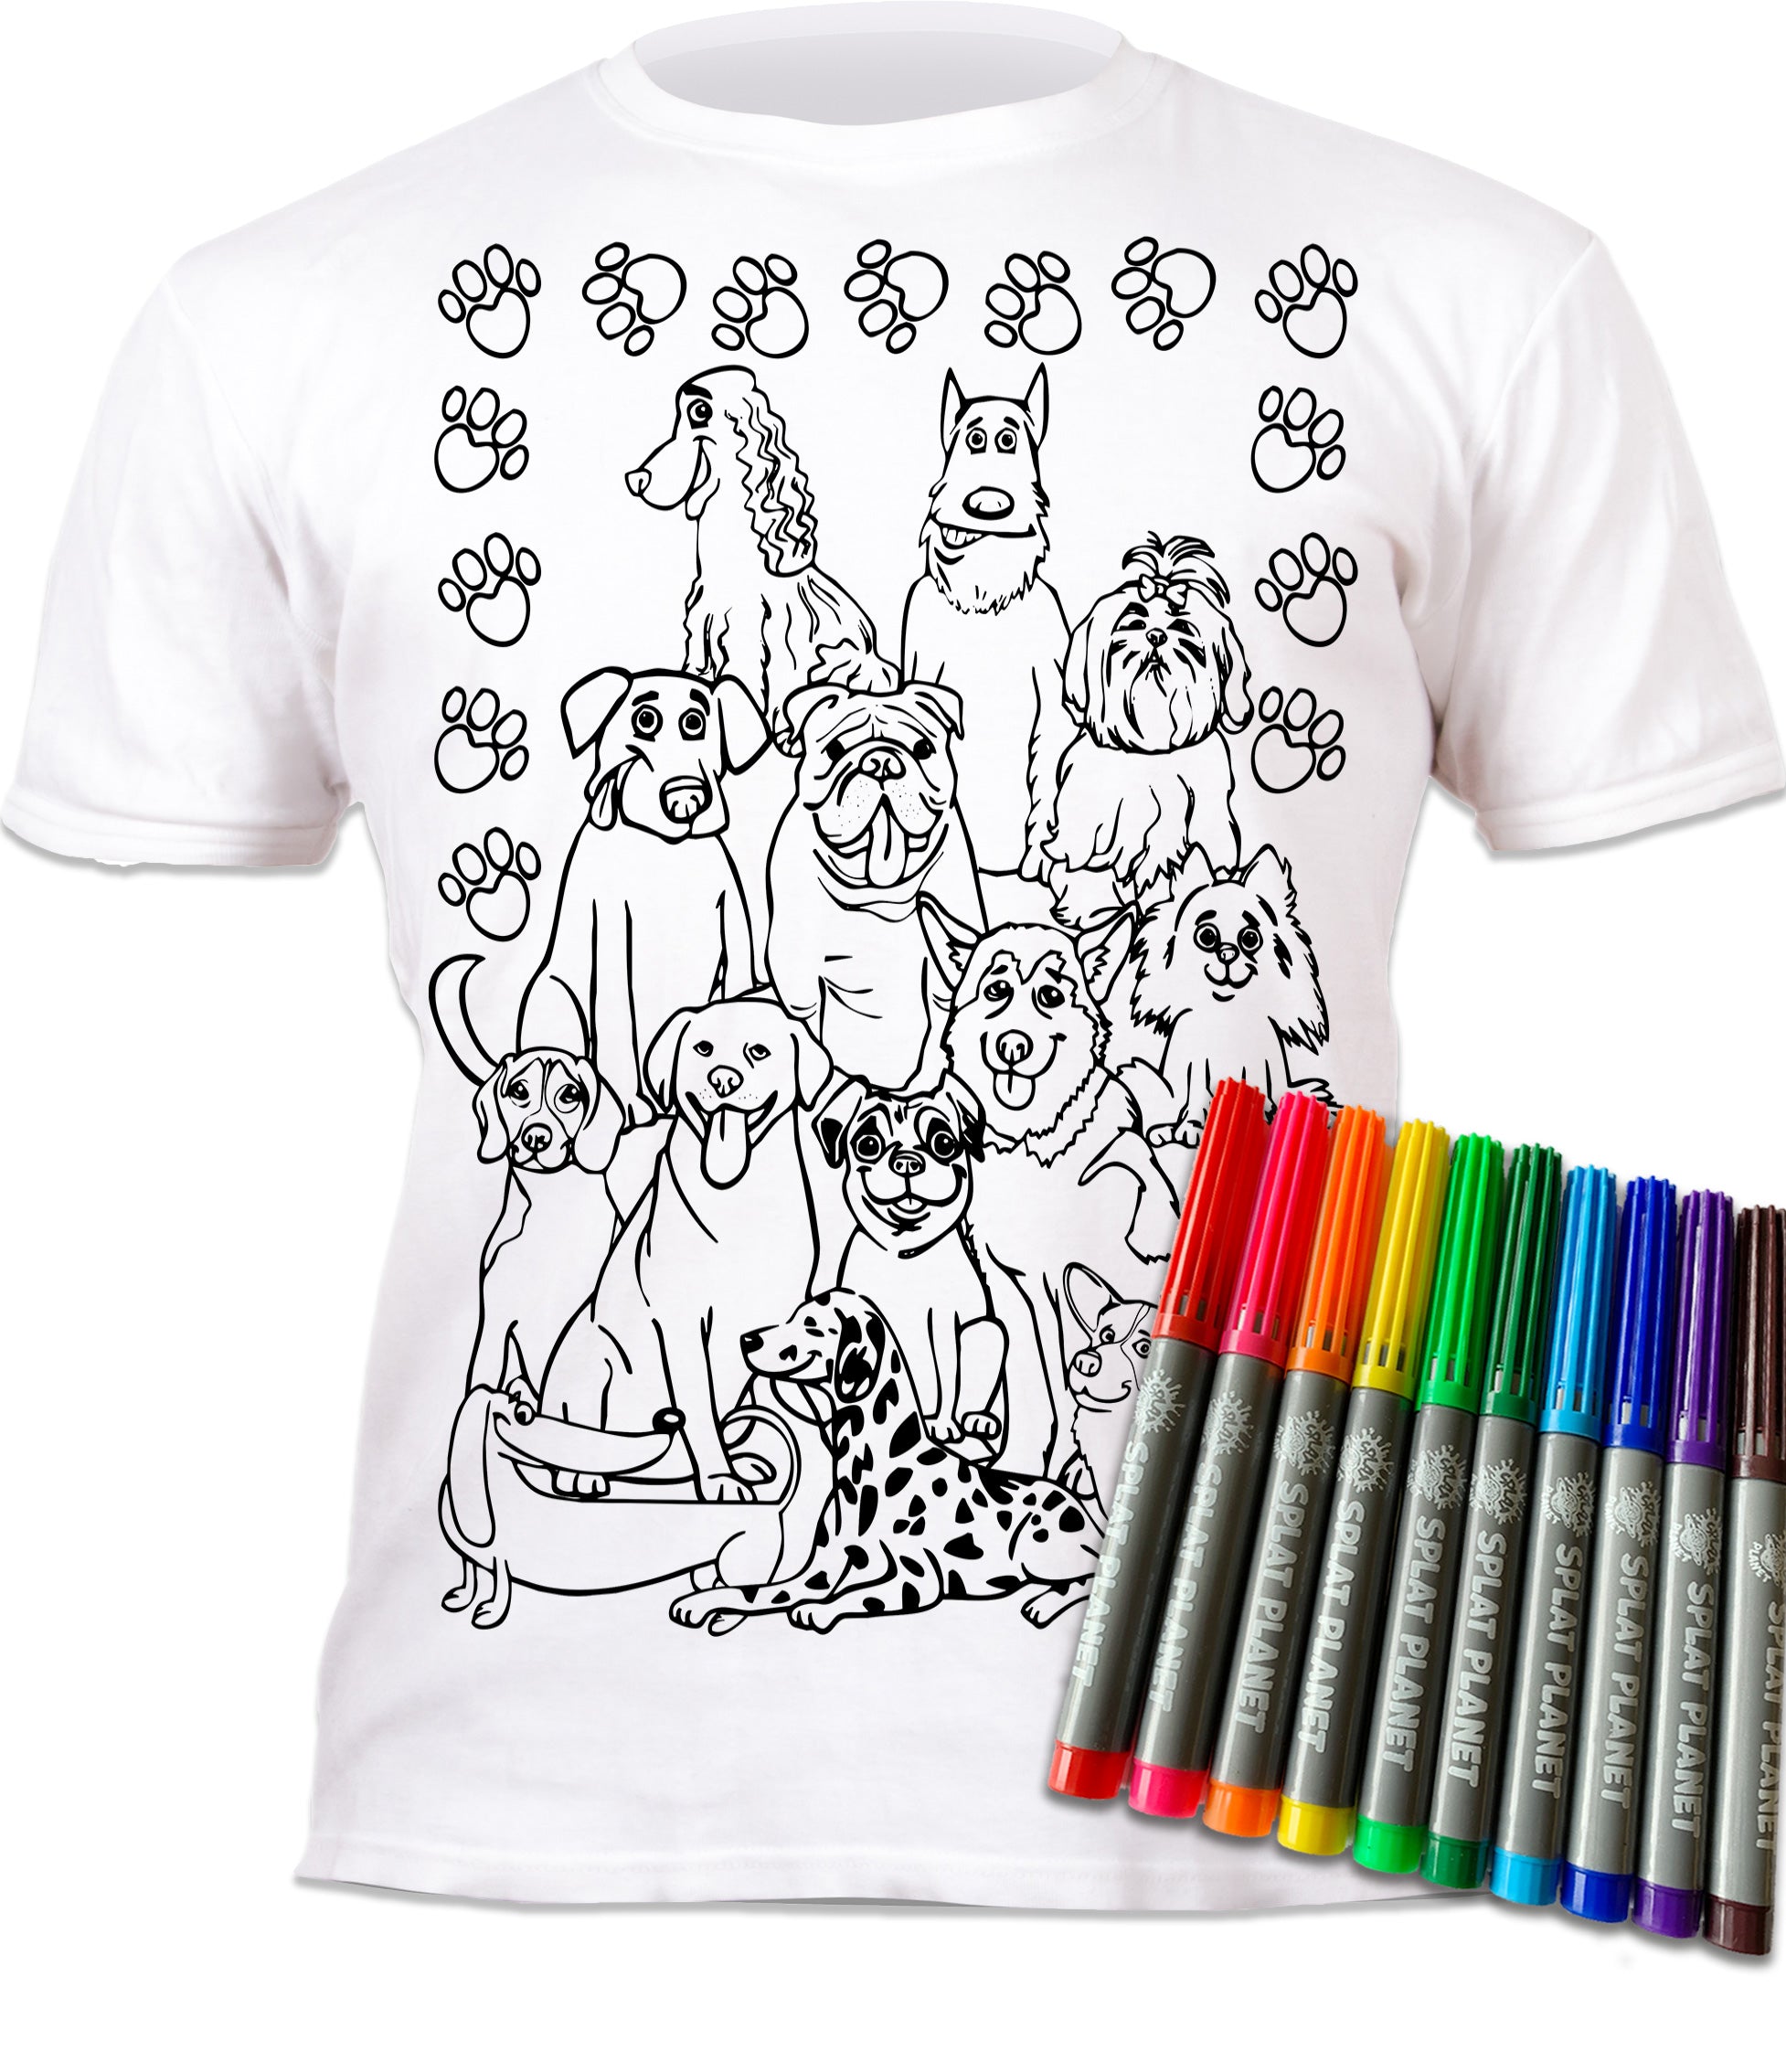 kids, children, chlidrens, eatsleepdoodle, eat sleep doodle, grafix, colour in t-shirt, colour in tshirt, colour in t shirt, color in t-shirt, color in t shirt, Puppy colouring, Crufts, Dogs, Labrador, golden retriever, Dogs colouring, colour in, wash out, colour in again, magic colouring, fabric pens, splat planet, colouring, colour in, washable pens, magic, toddlers, Kids, magic,  colouring, fabric pens, gift, christmas present, unique easter present, easter present, easter gift, kids gift, 